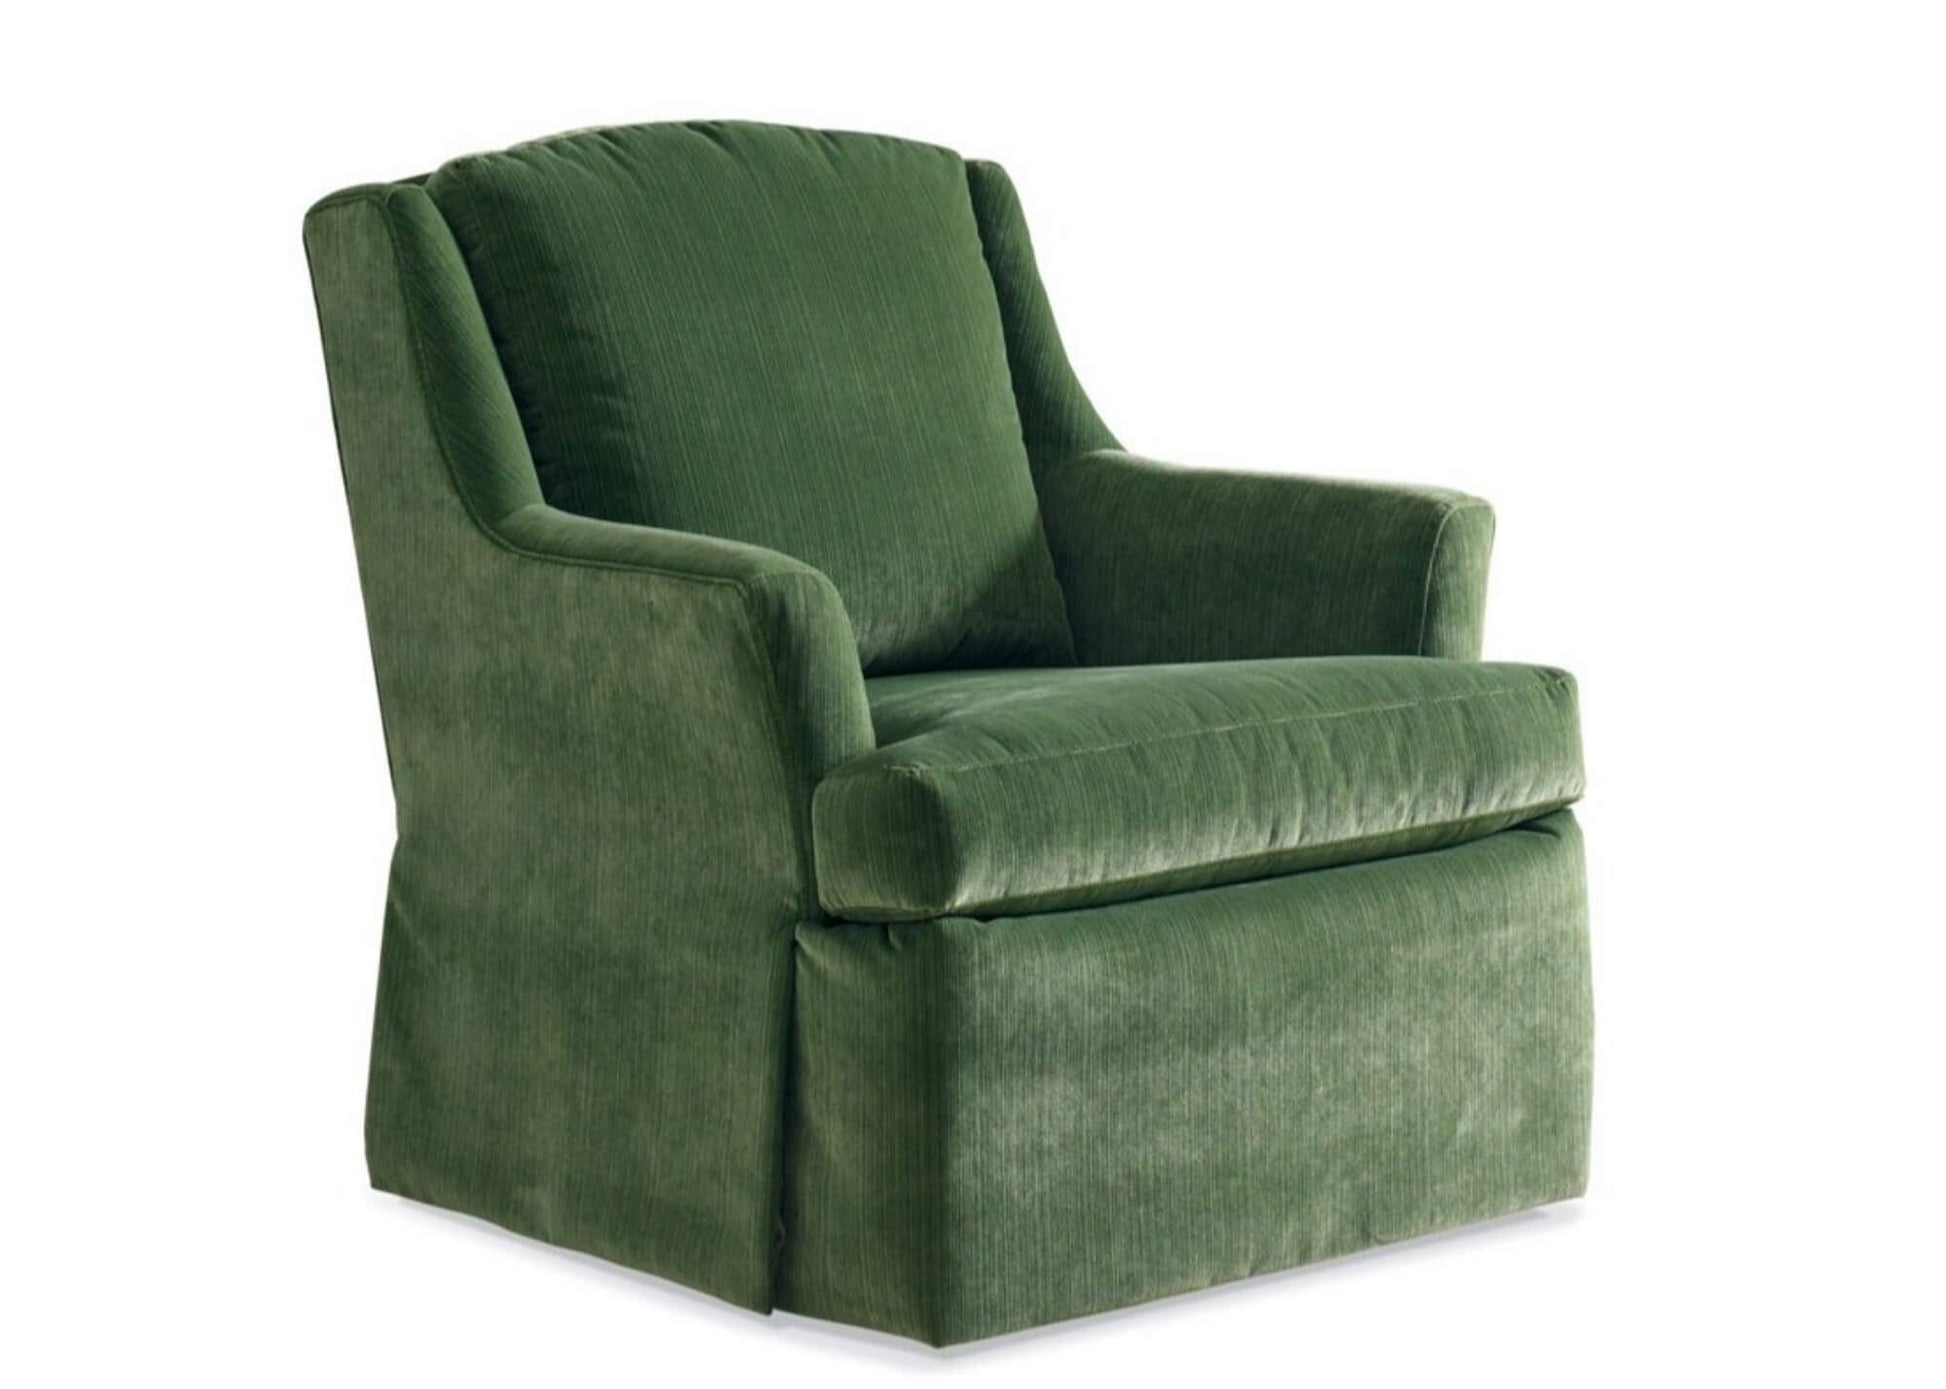 Sherrill Furniture Swivel Chair in a green fabric with track arm. 